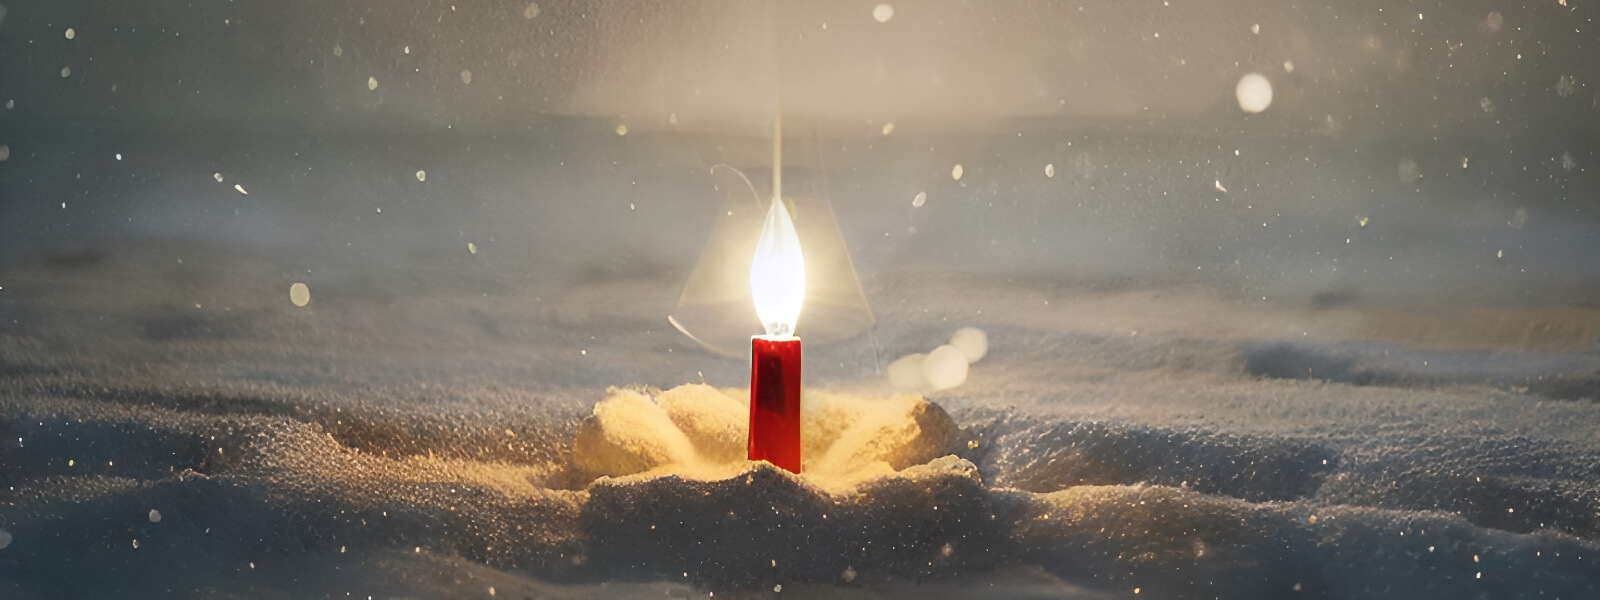 A single red candle in the snow